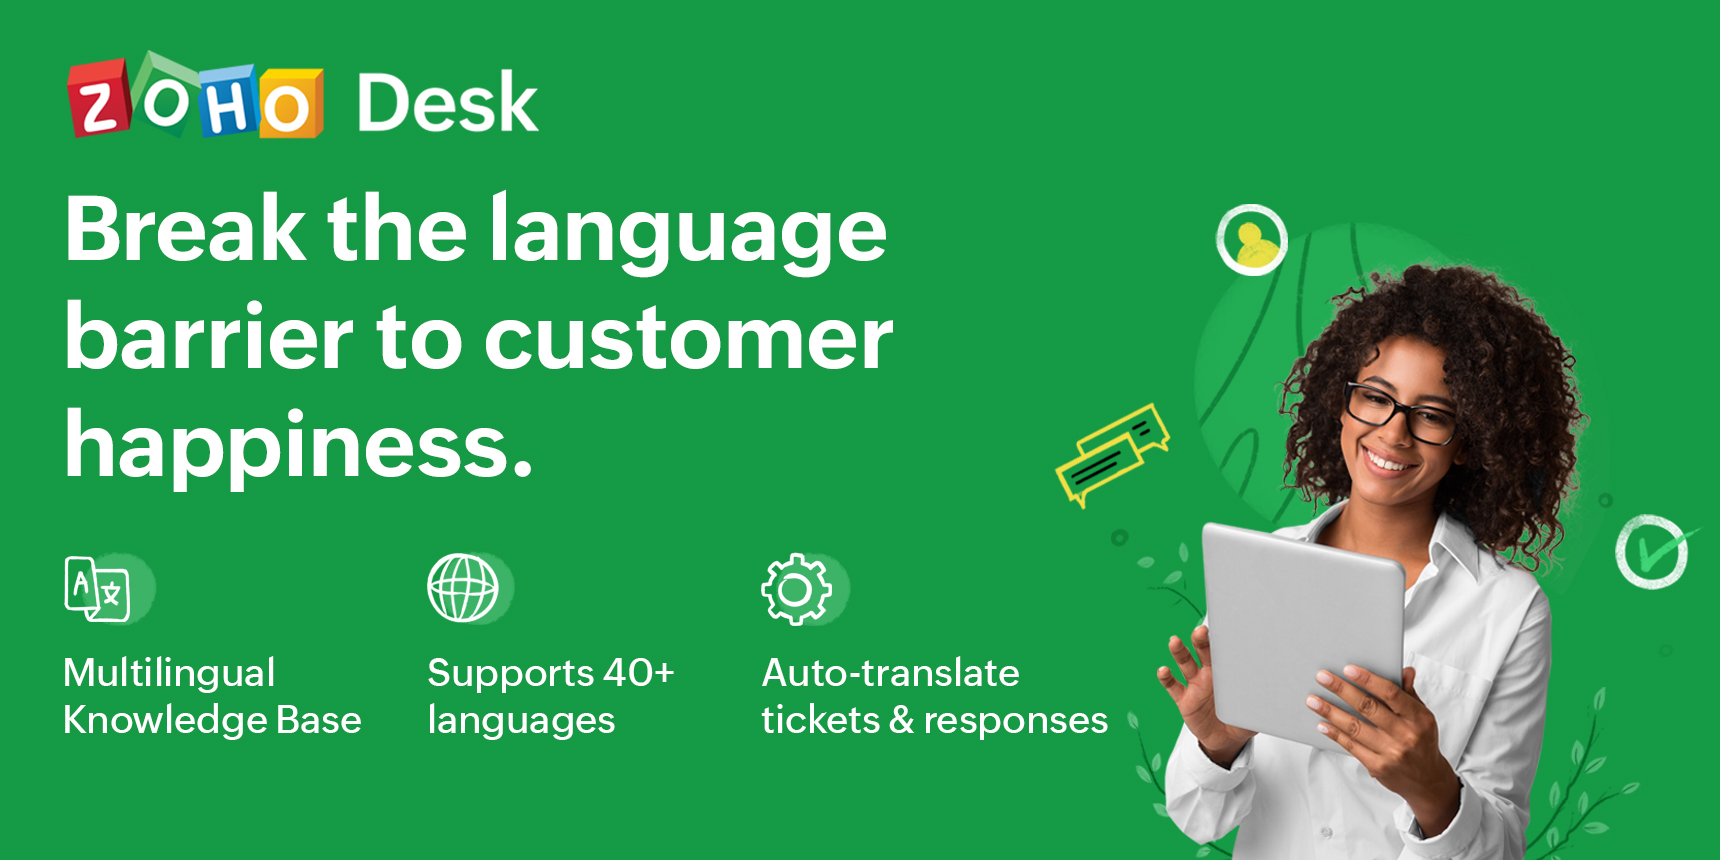 Global Multilingual Customer Service With a Local Support Team